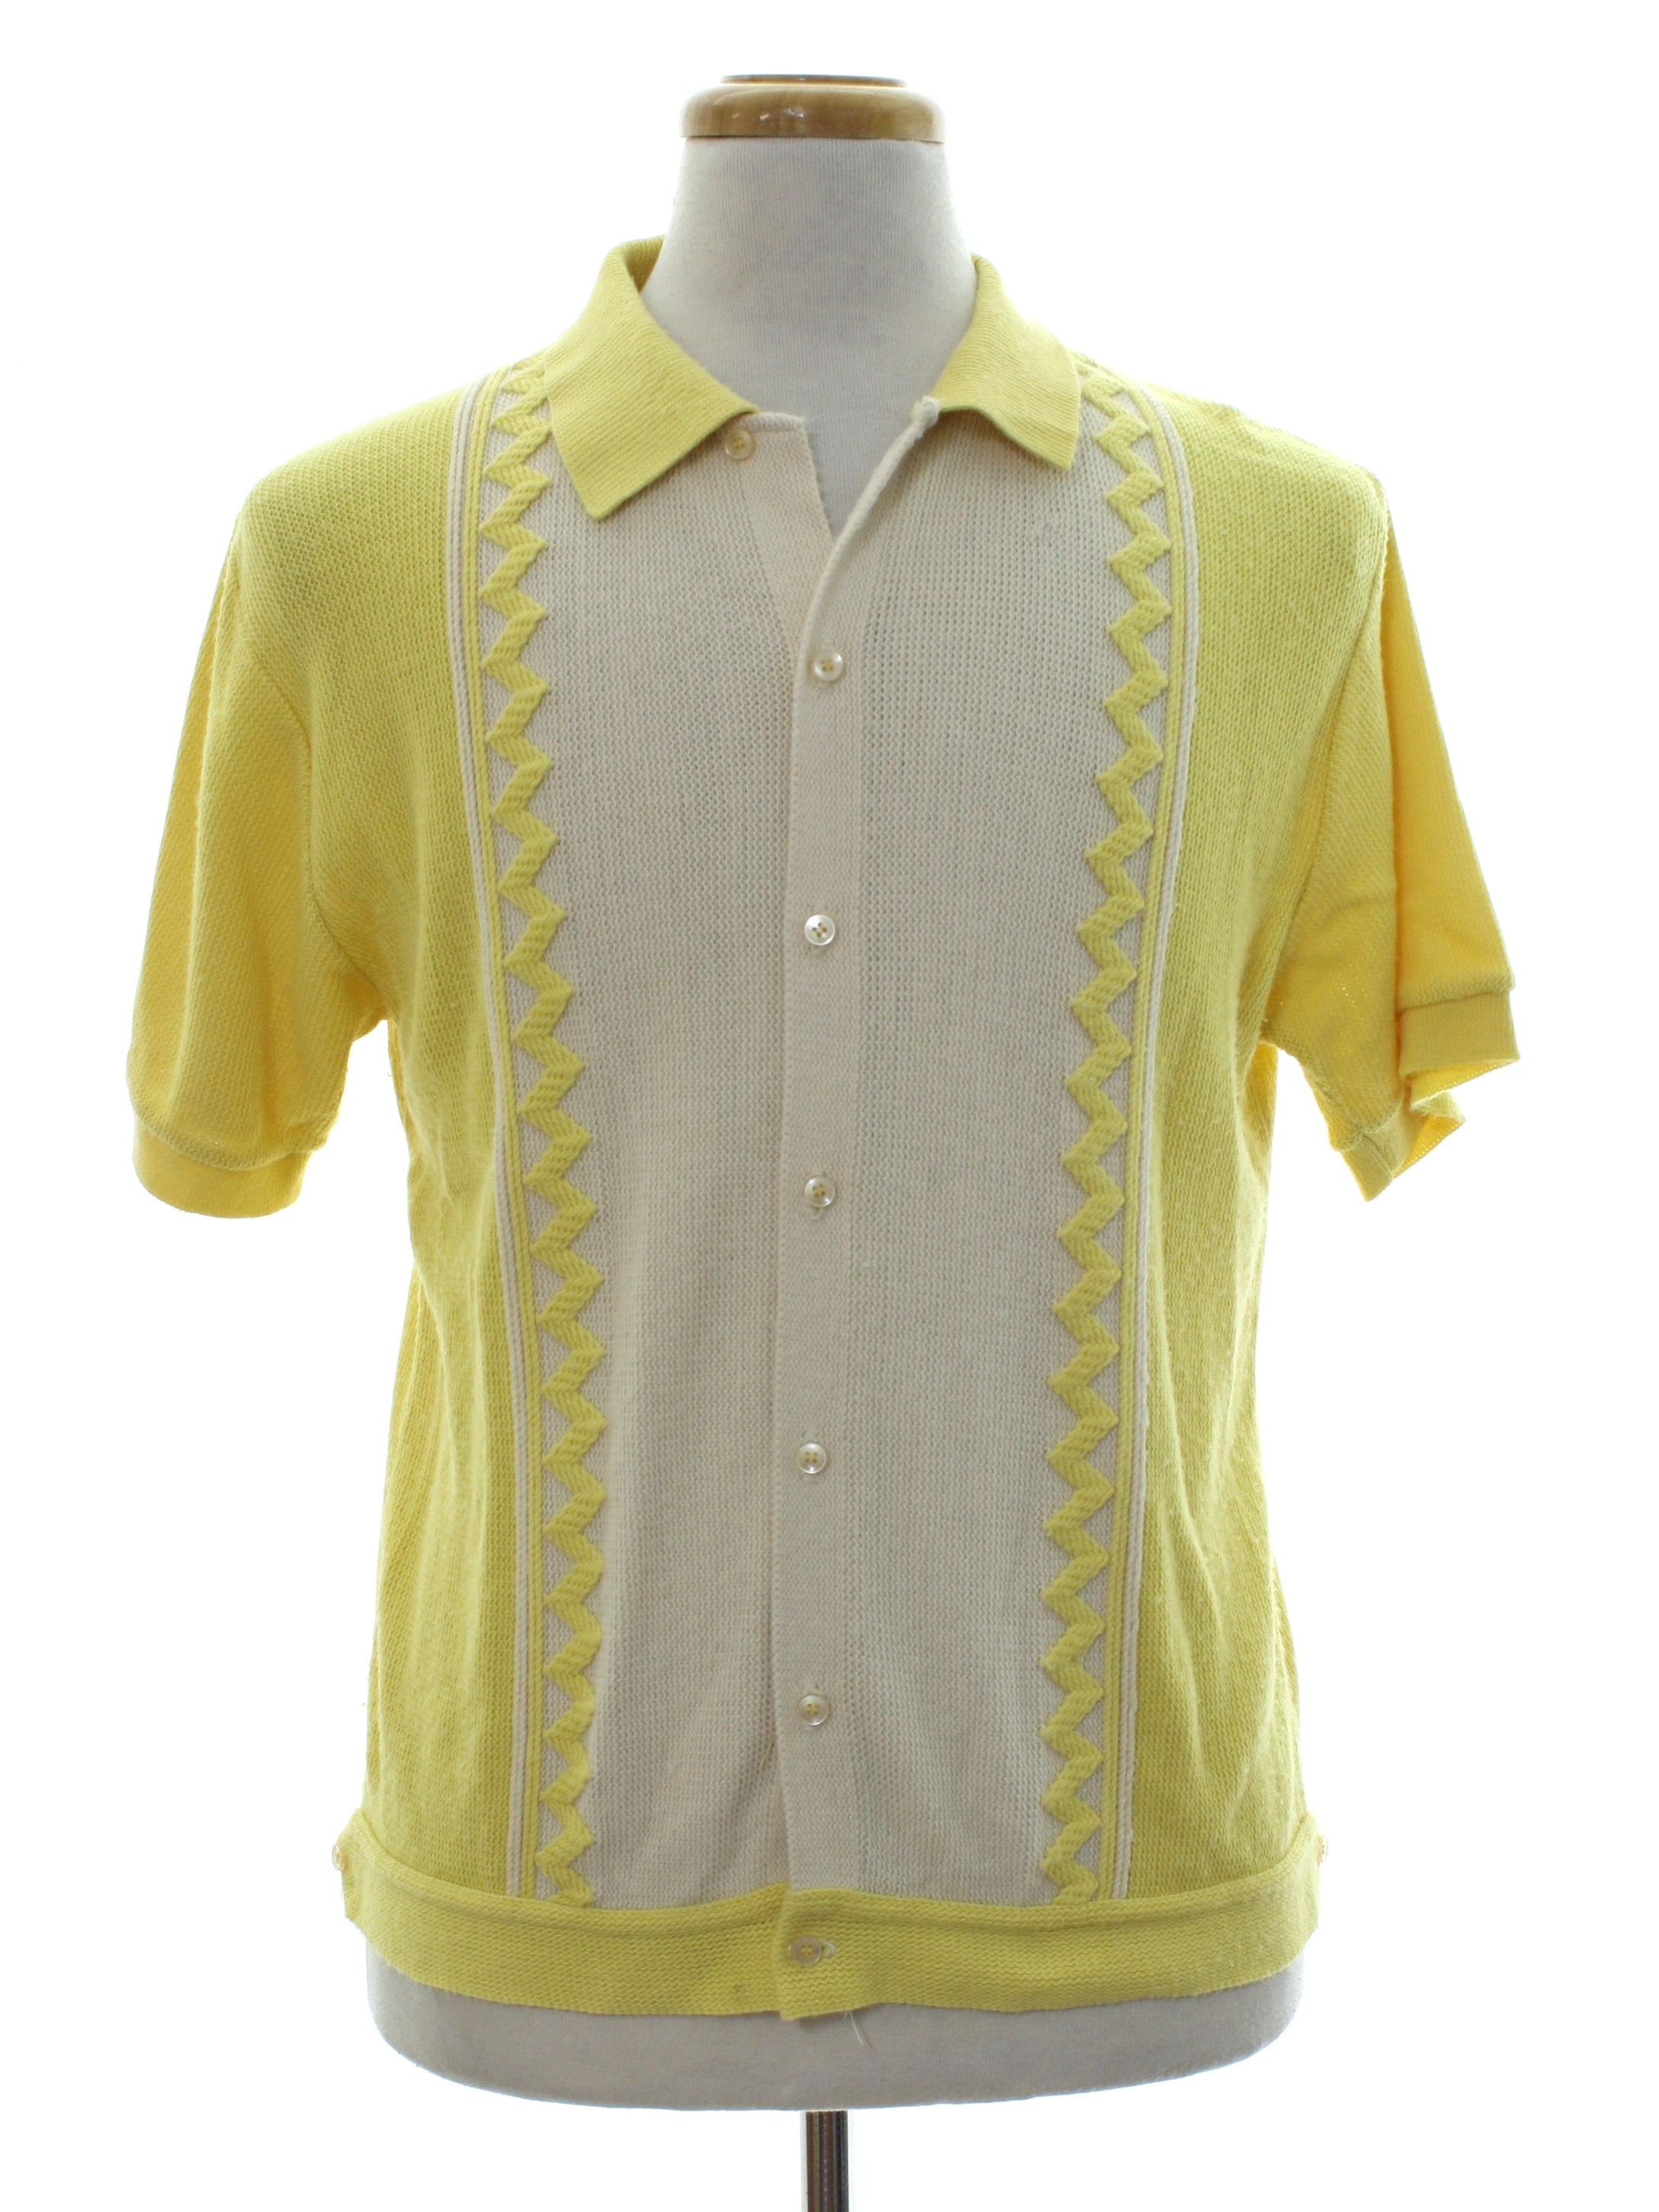 Retro 50s Knit Shirt Late 50s No Label Mens yellow background, white